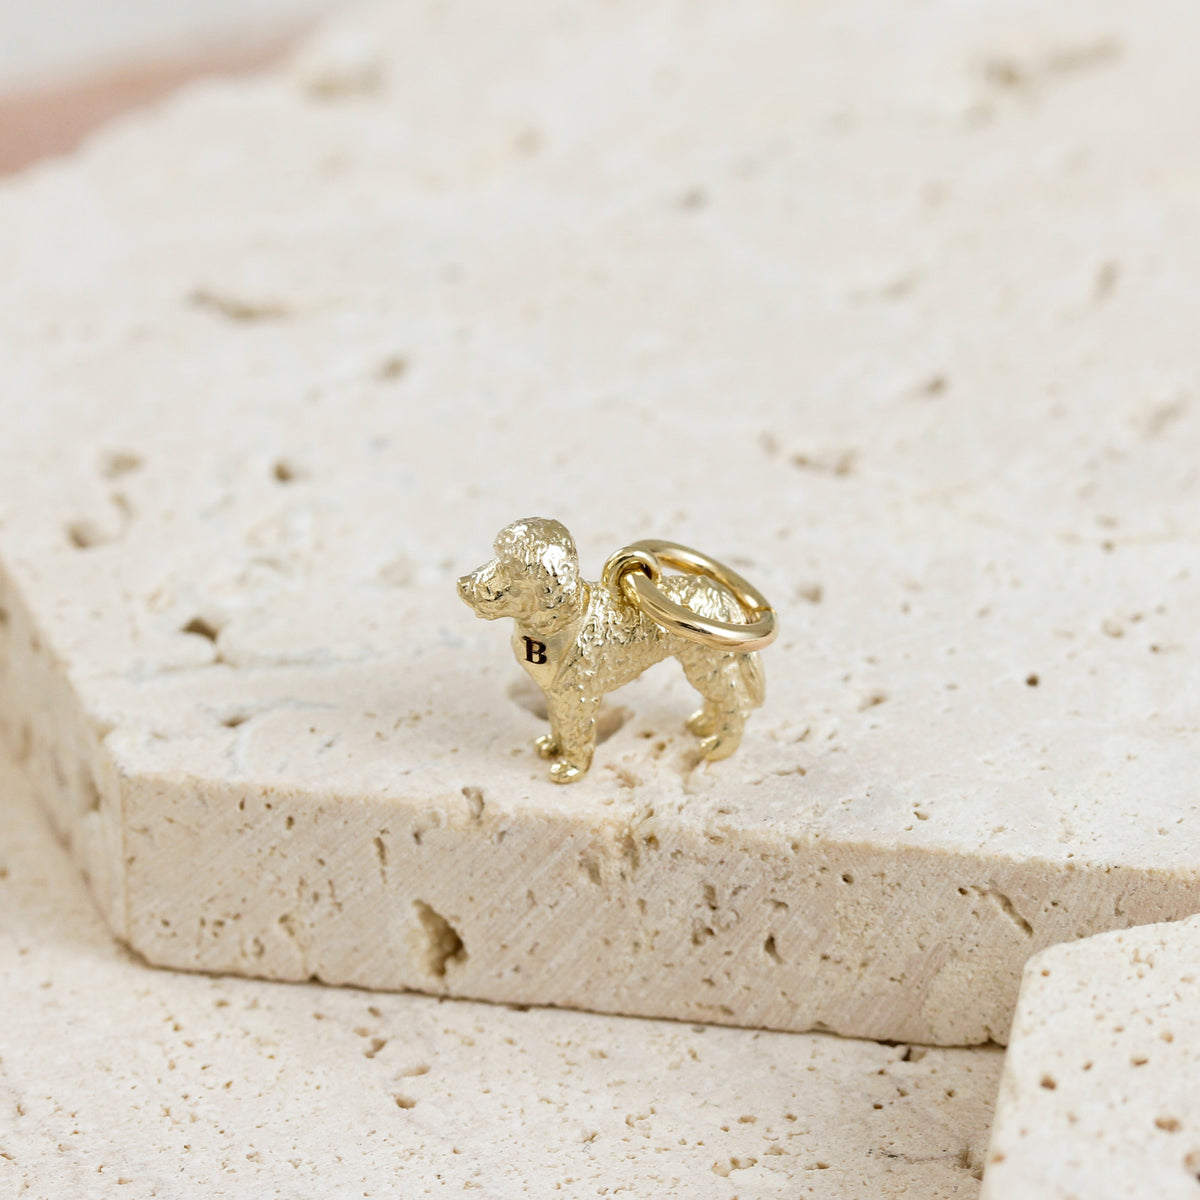 Solid 9ct gold Labradoodle charm with tiny bandana, perfect for a charm bracelet or necklace.